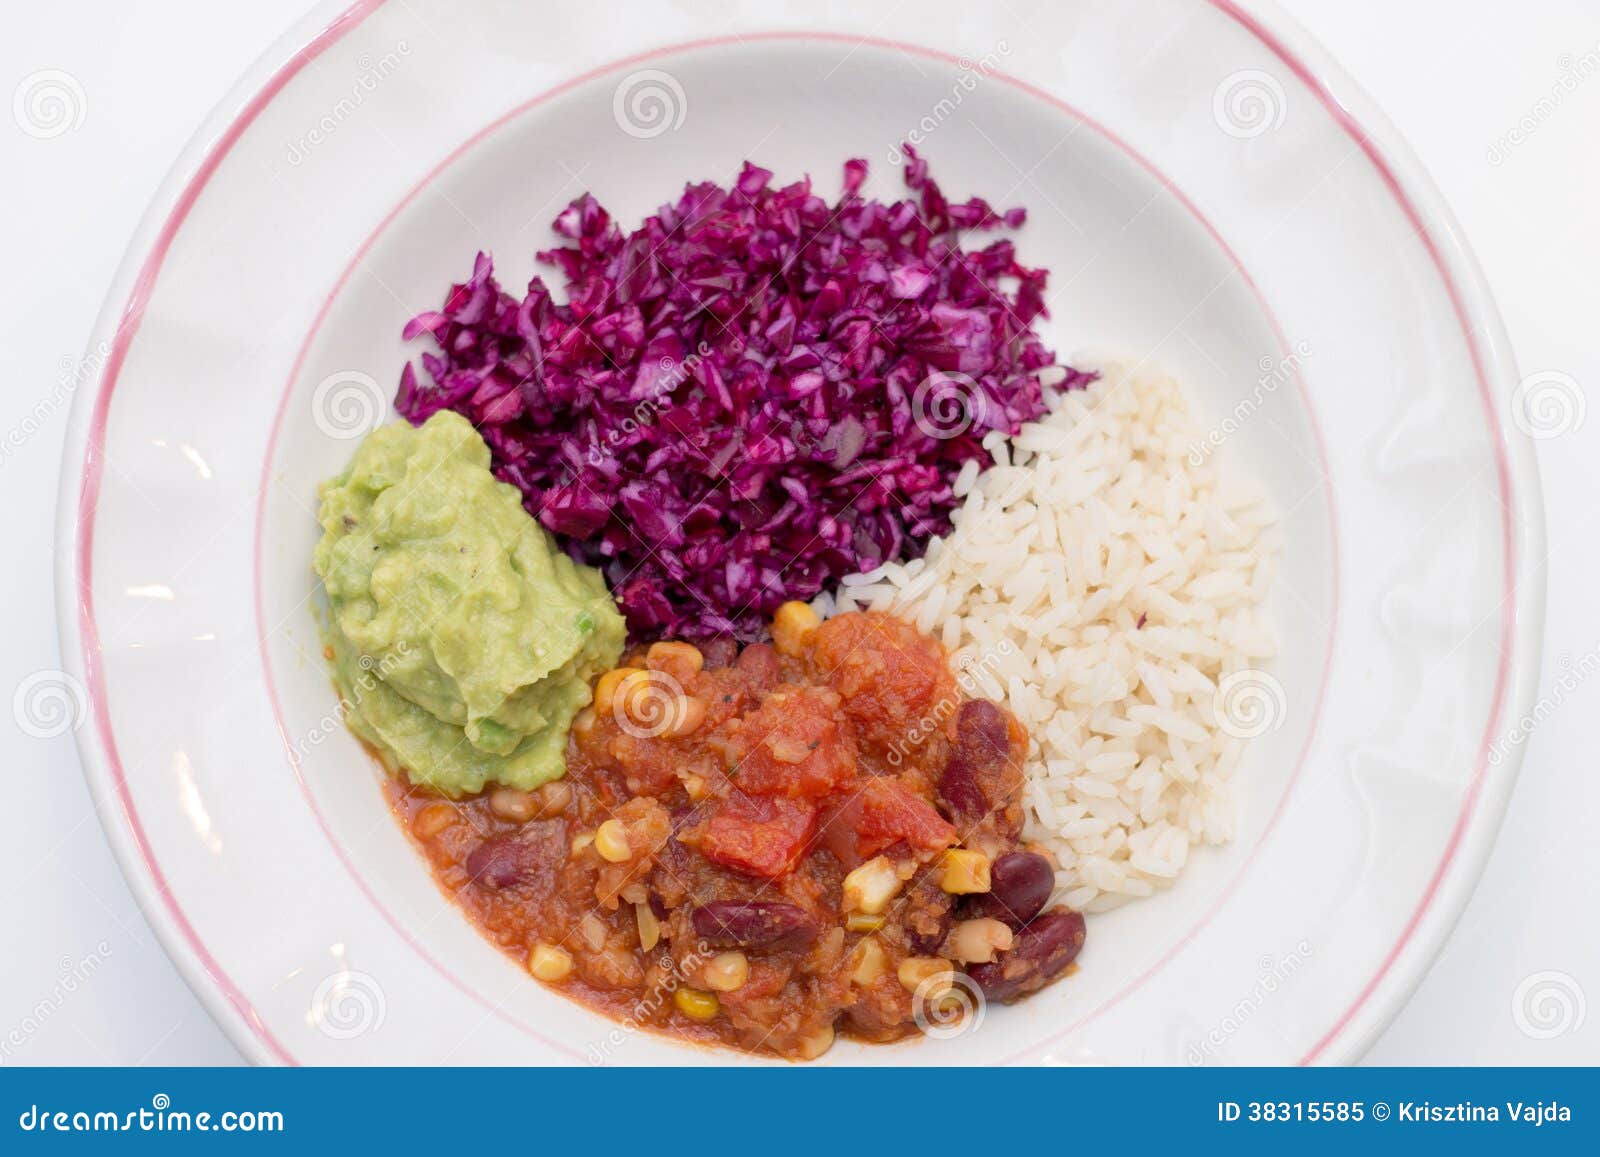 white plate of chili sin carne with red cabbage, guacamole and r